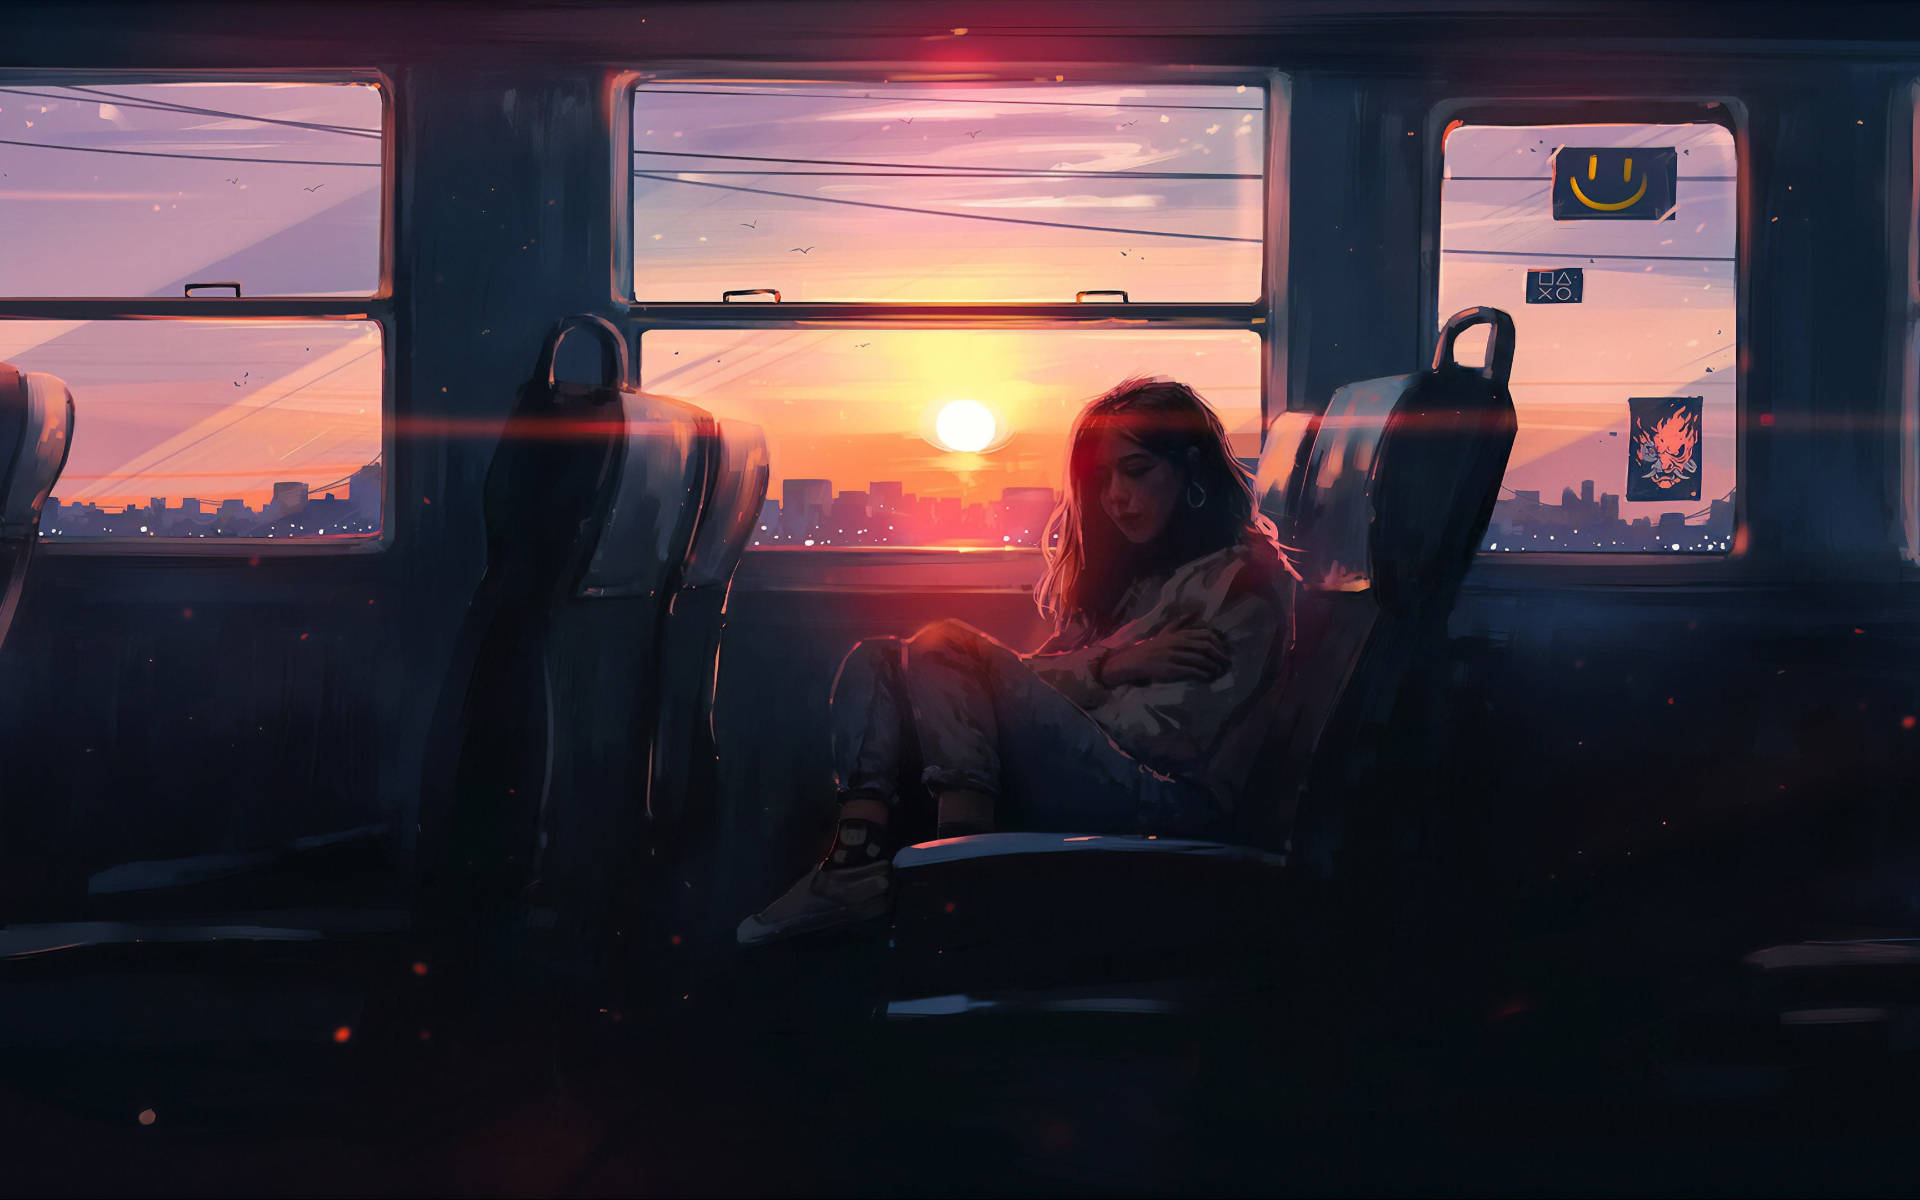 Alone On The Bus Comic Art Background